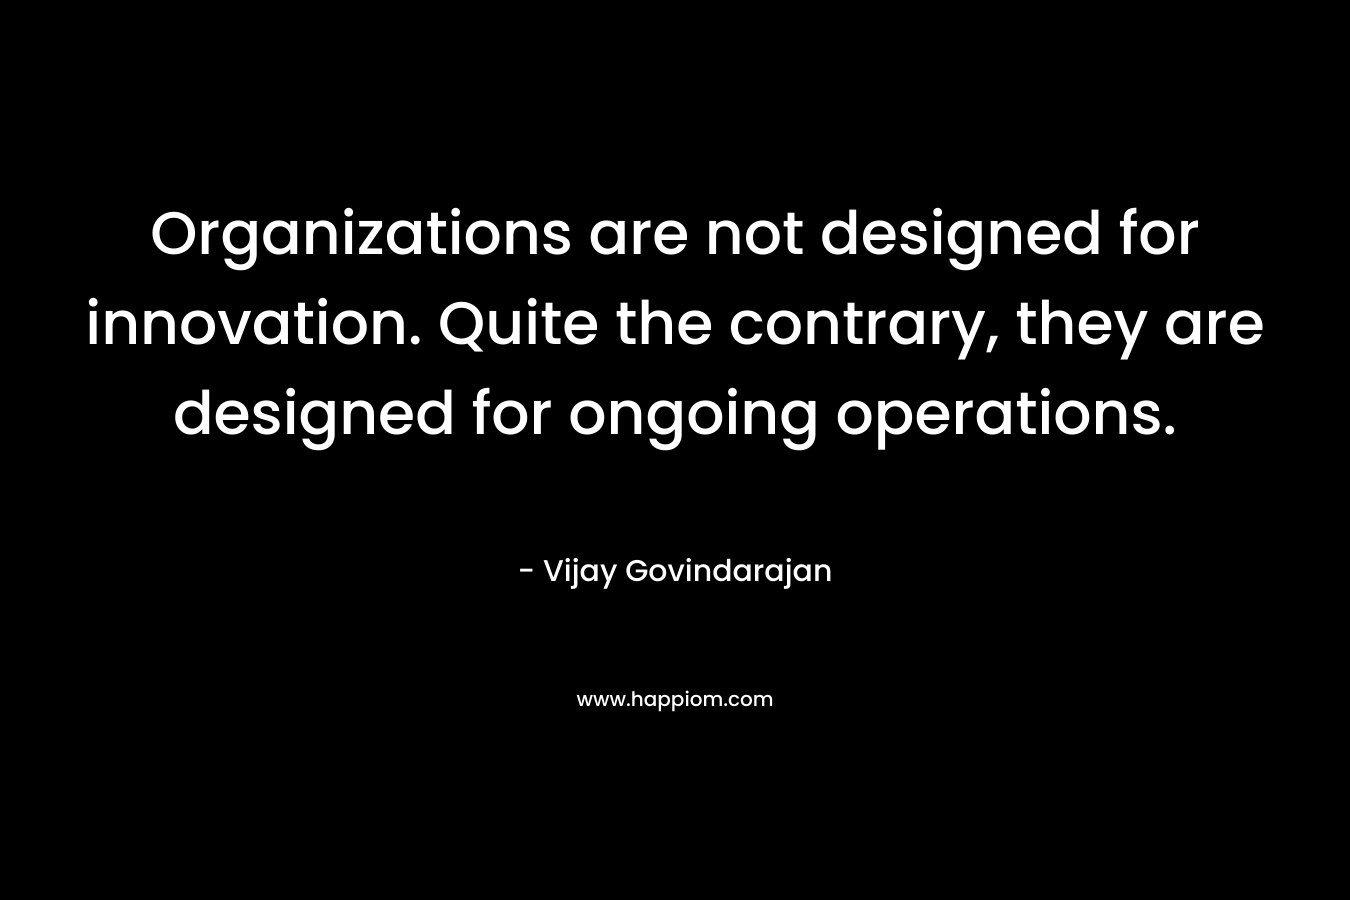 Organizations are not designed for innovation. Quite the contrary, they are designed for ongoing operations.